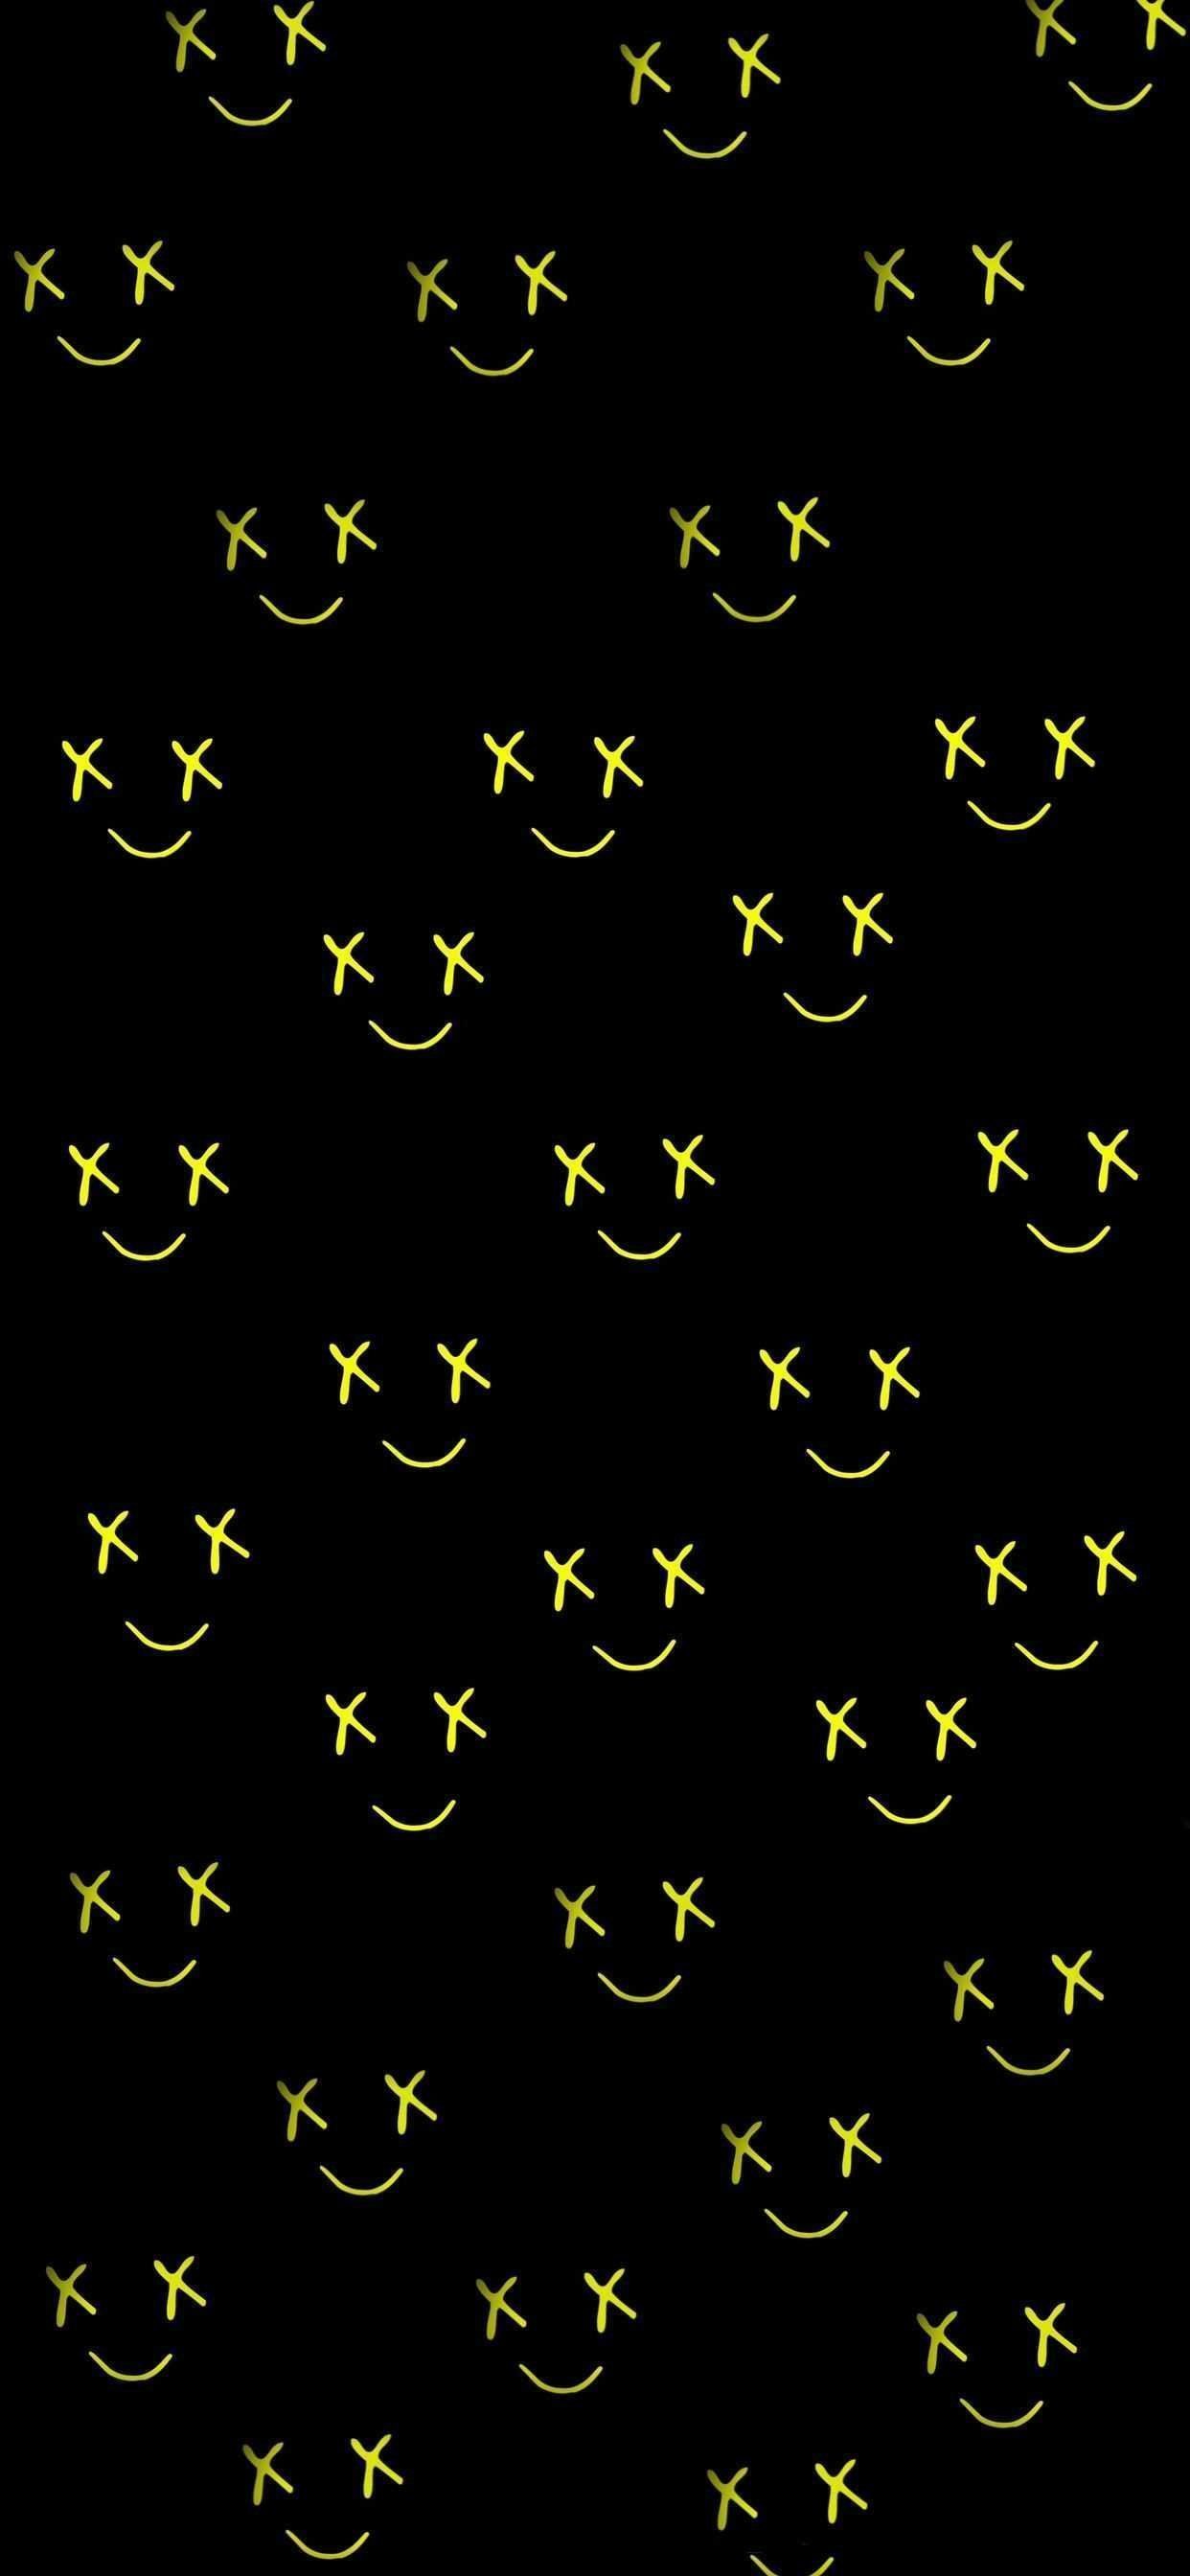 Aesthetic smiley faces Wallpaper Download